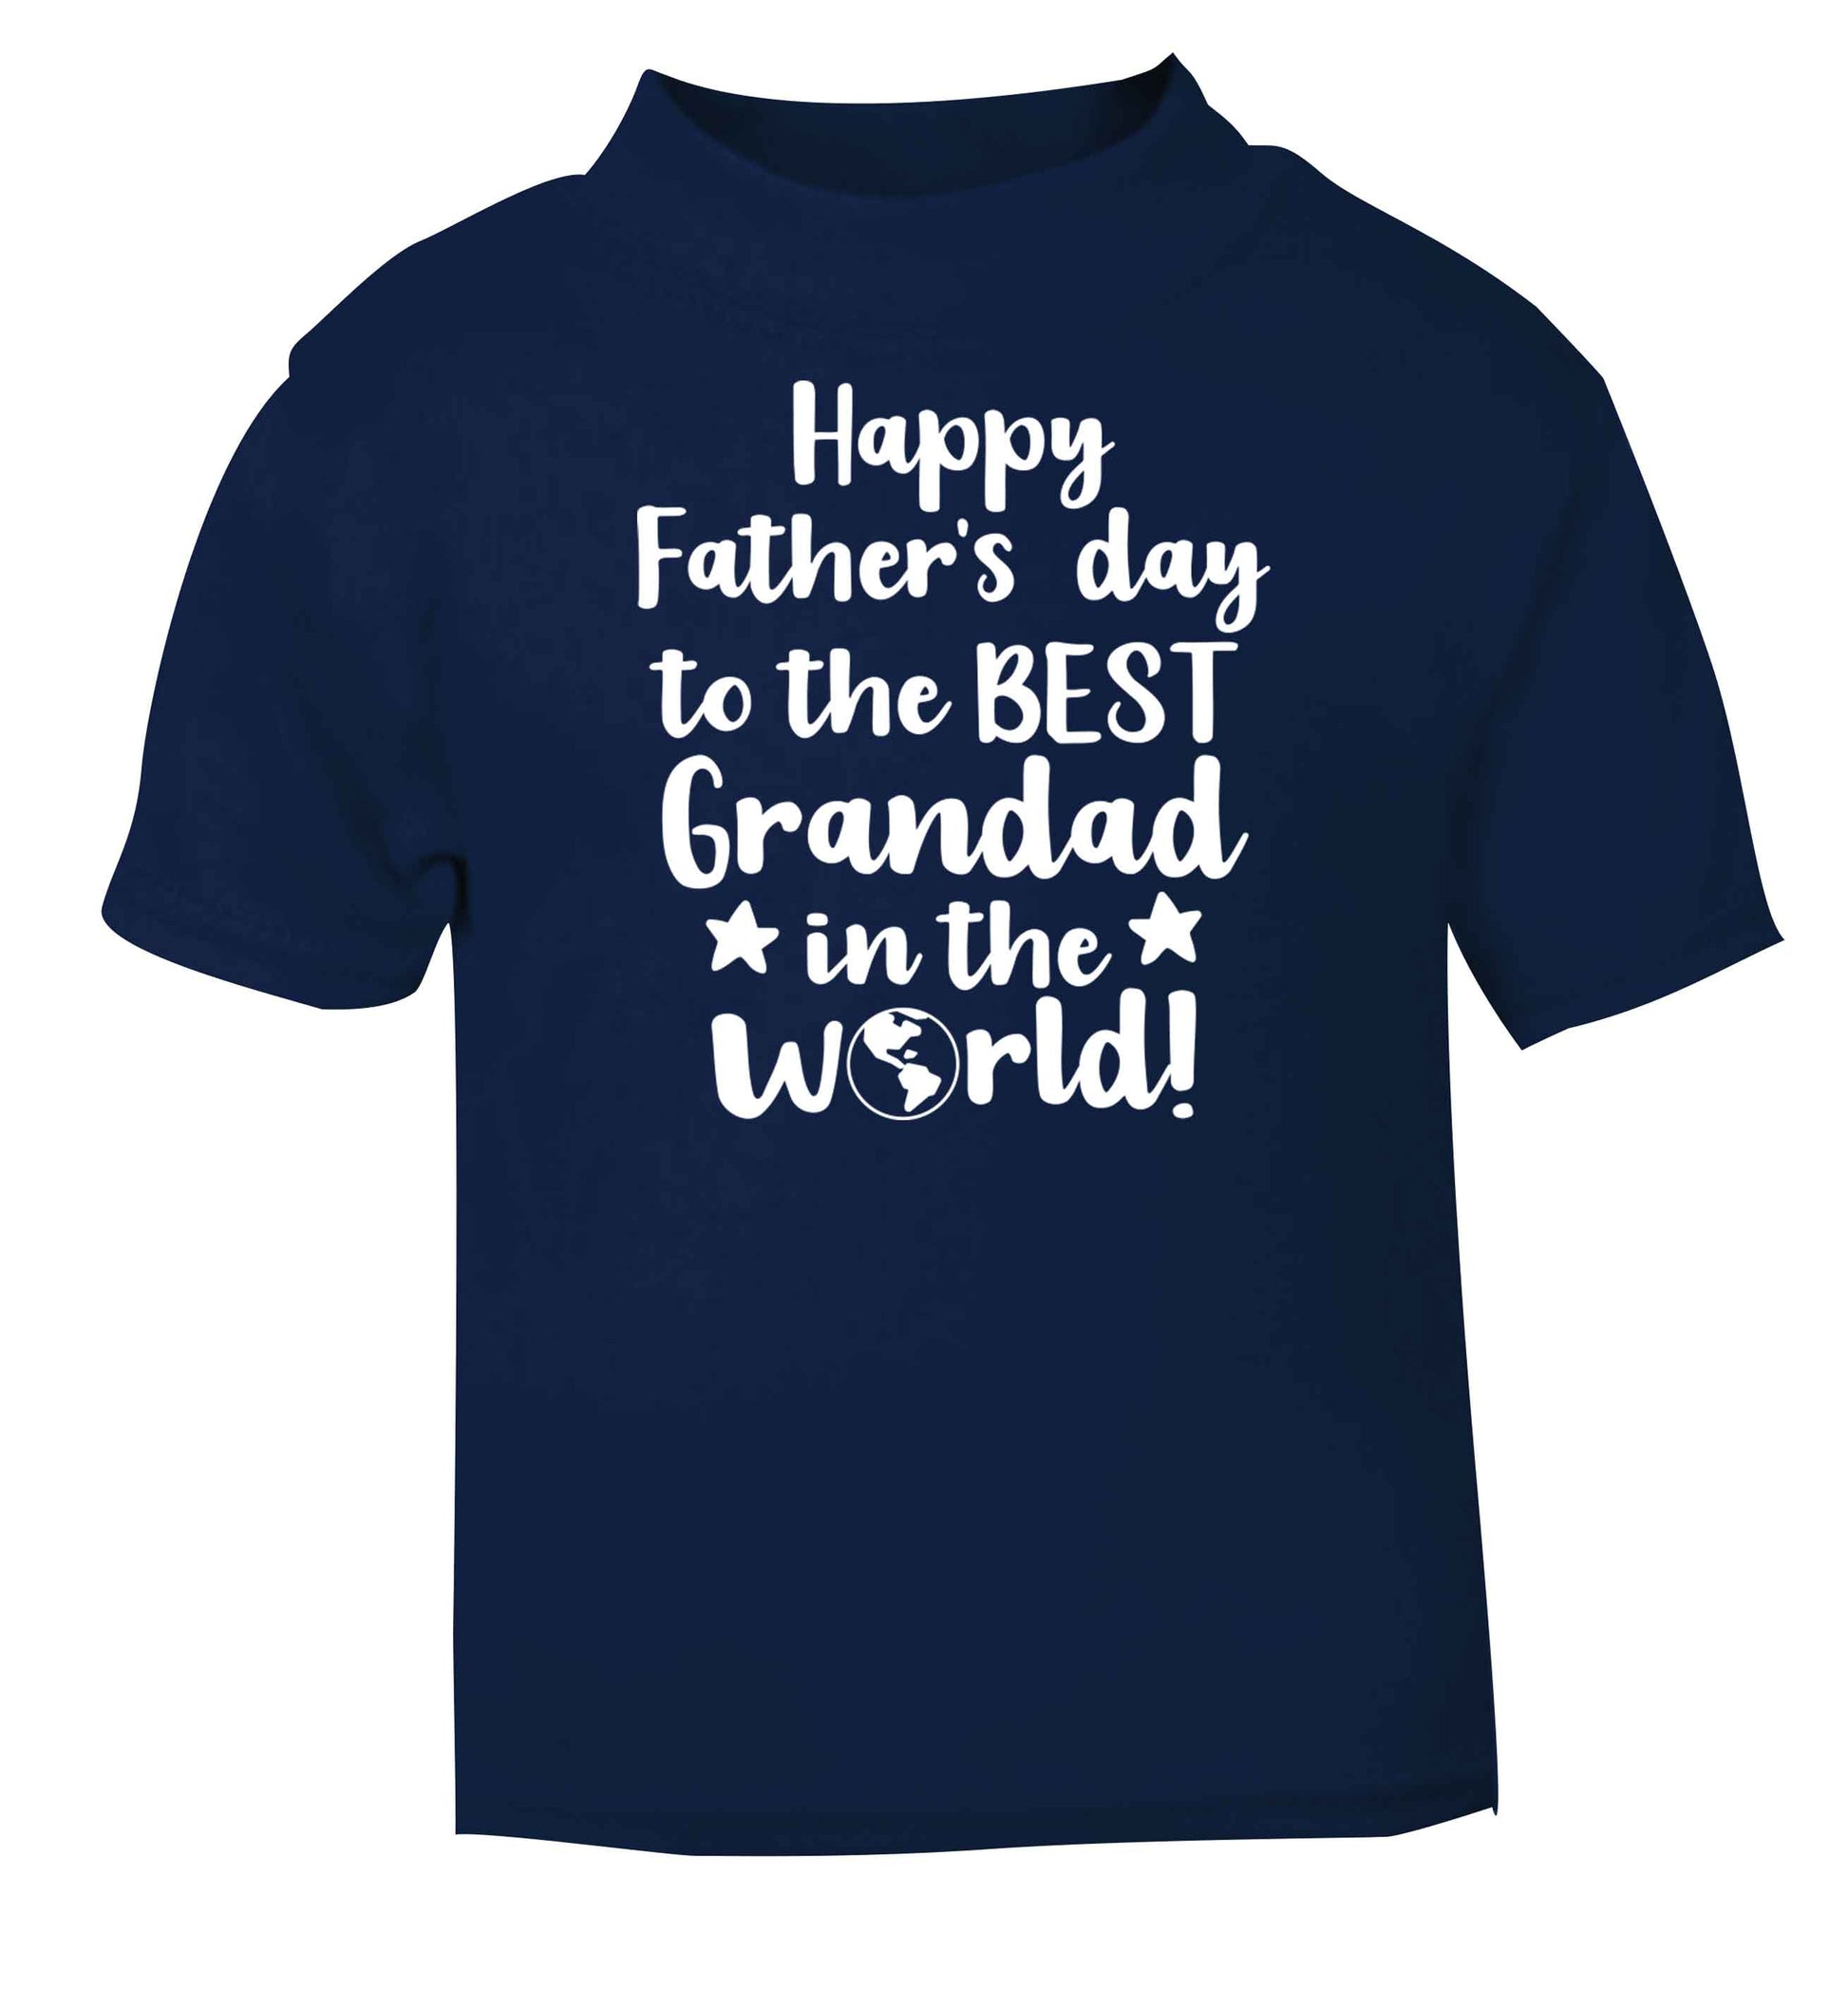 Happy Father's day to the best grandad in the world navy baby toddler Tshirt 2 Years